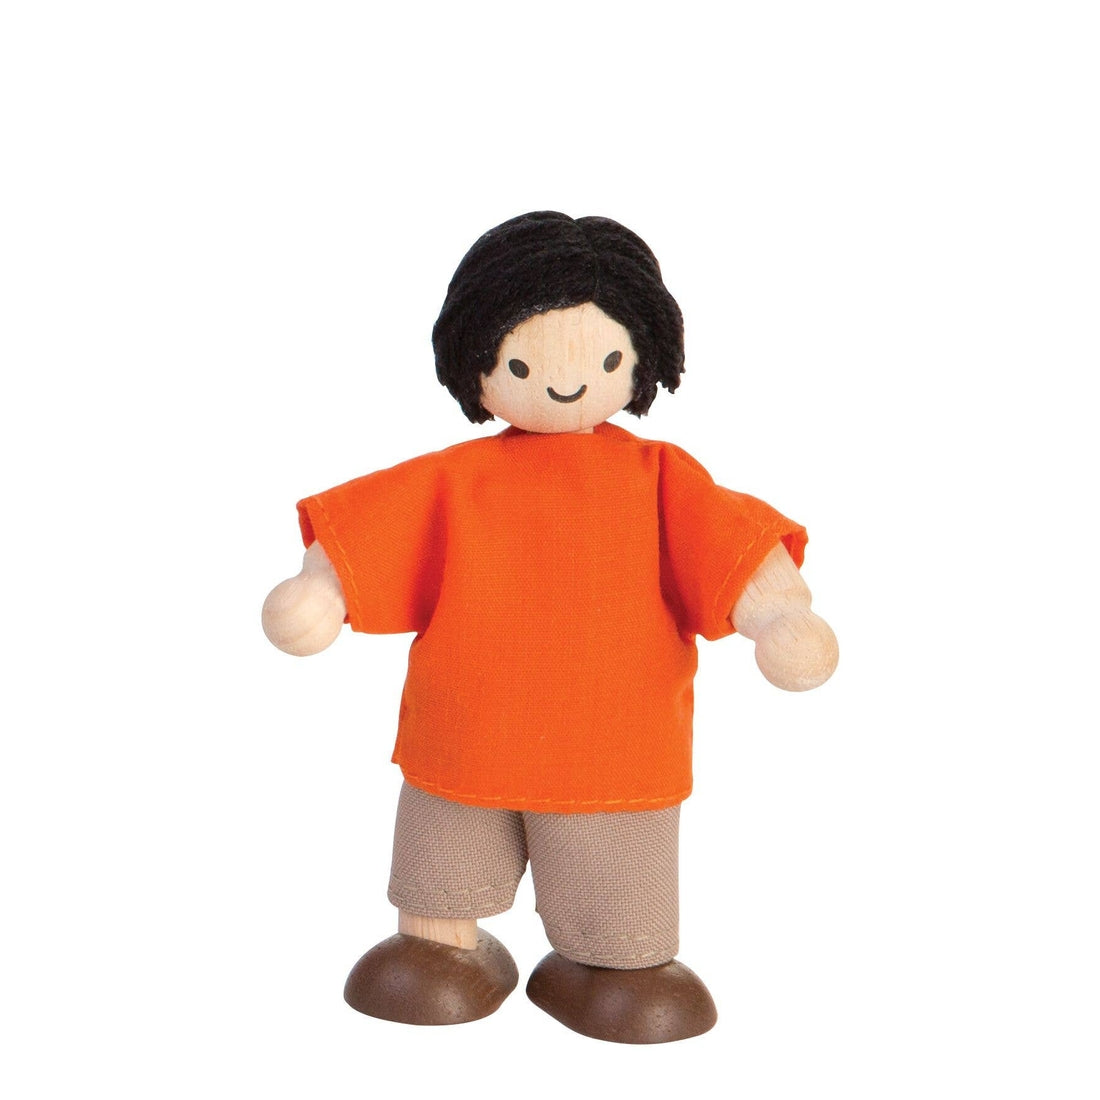 plan toys doll with black hair and in a orange shirt